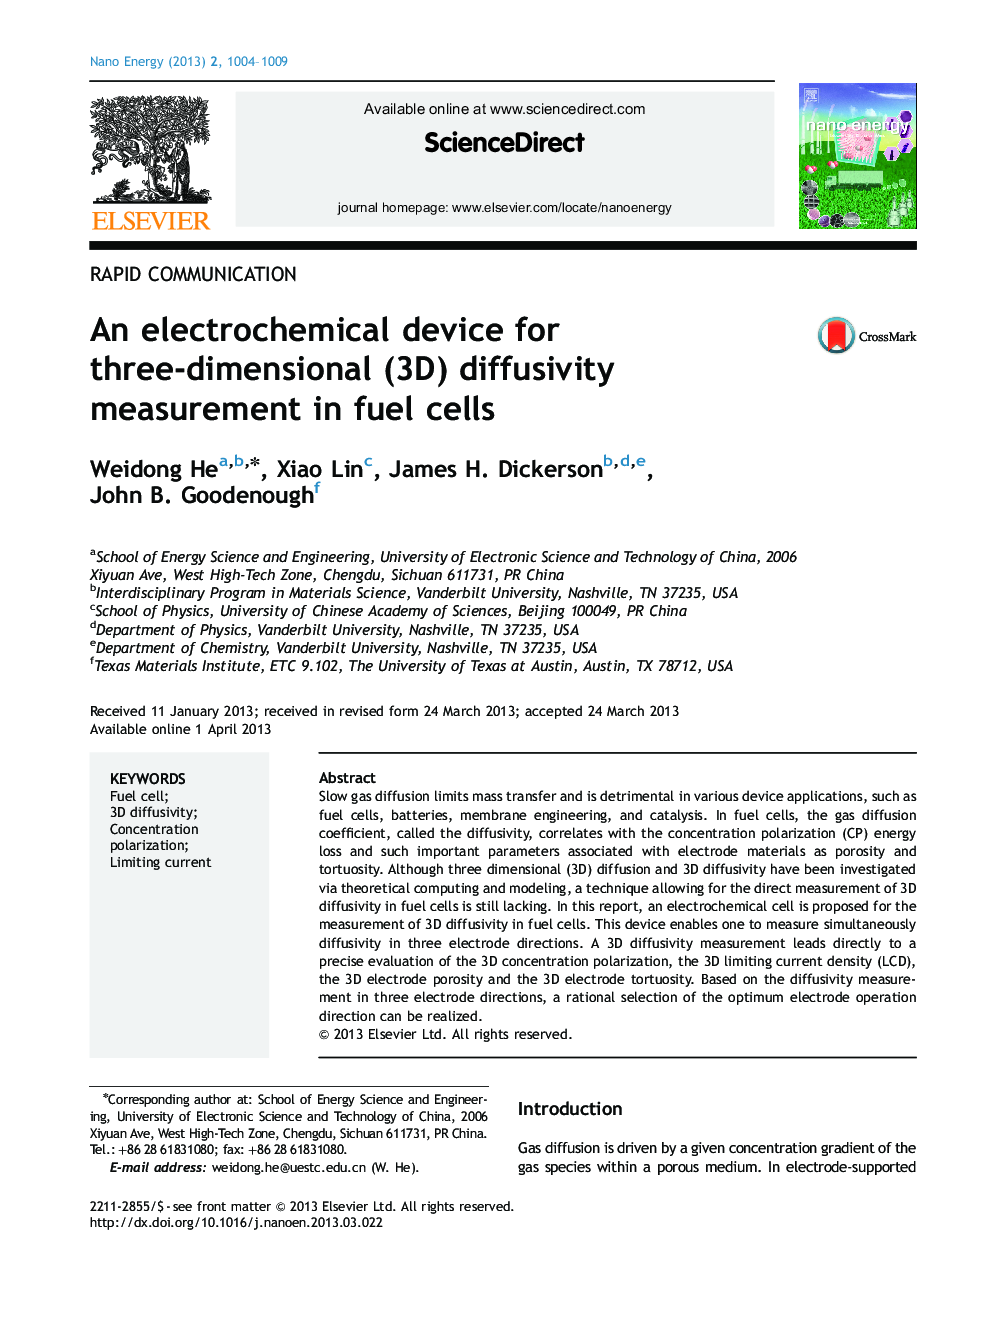 An electrochemical device for three-dimensional (3D) diffusivity measurement in fuel cells